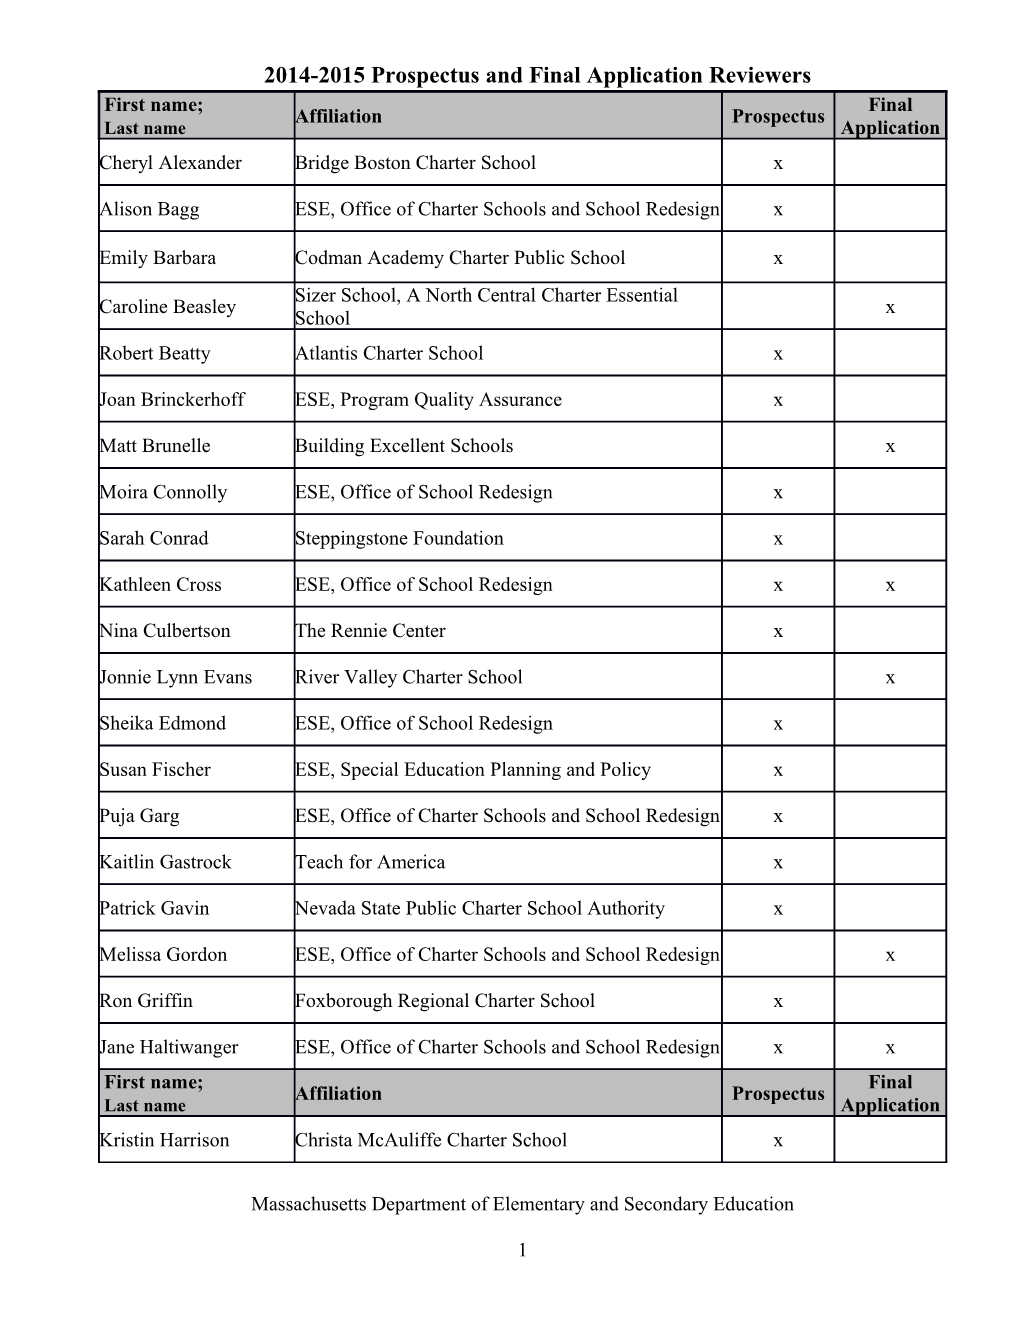 List of Application Reviewers 2014-15